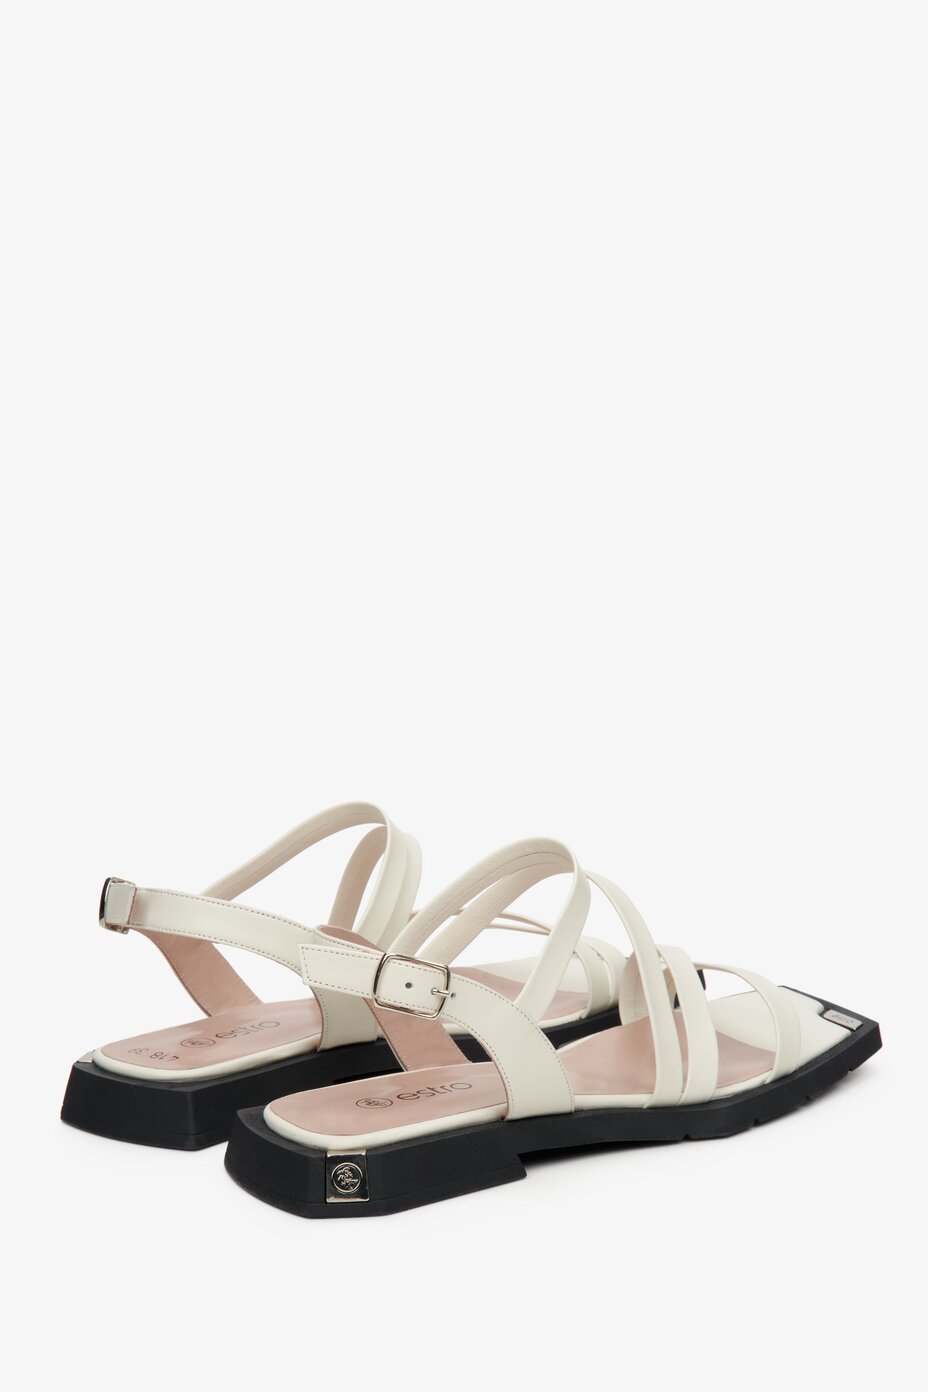 Leather, women's white sandals by Estro with thin straps - presentation of the back part of the shoes.